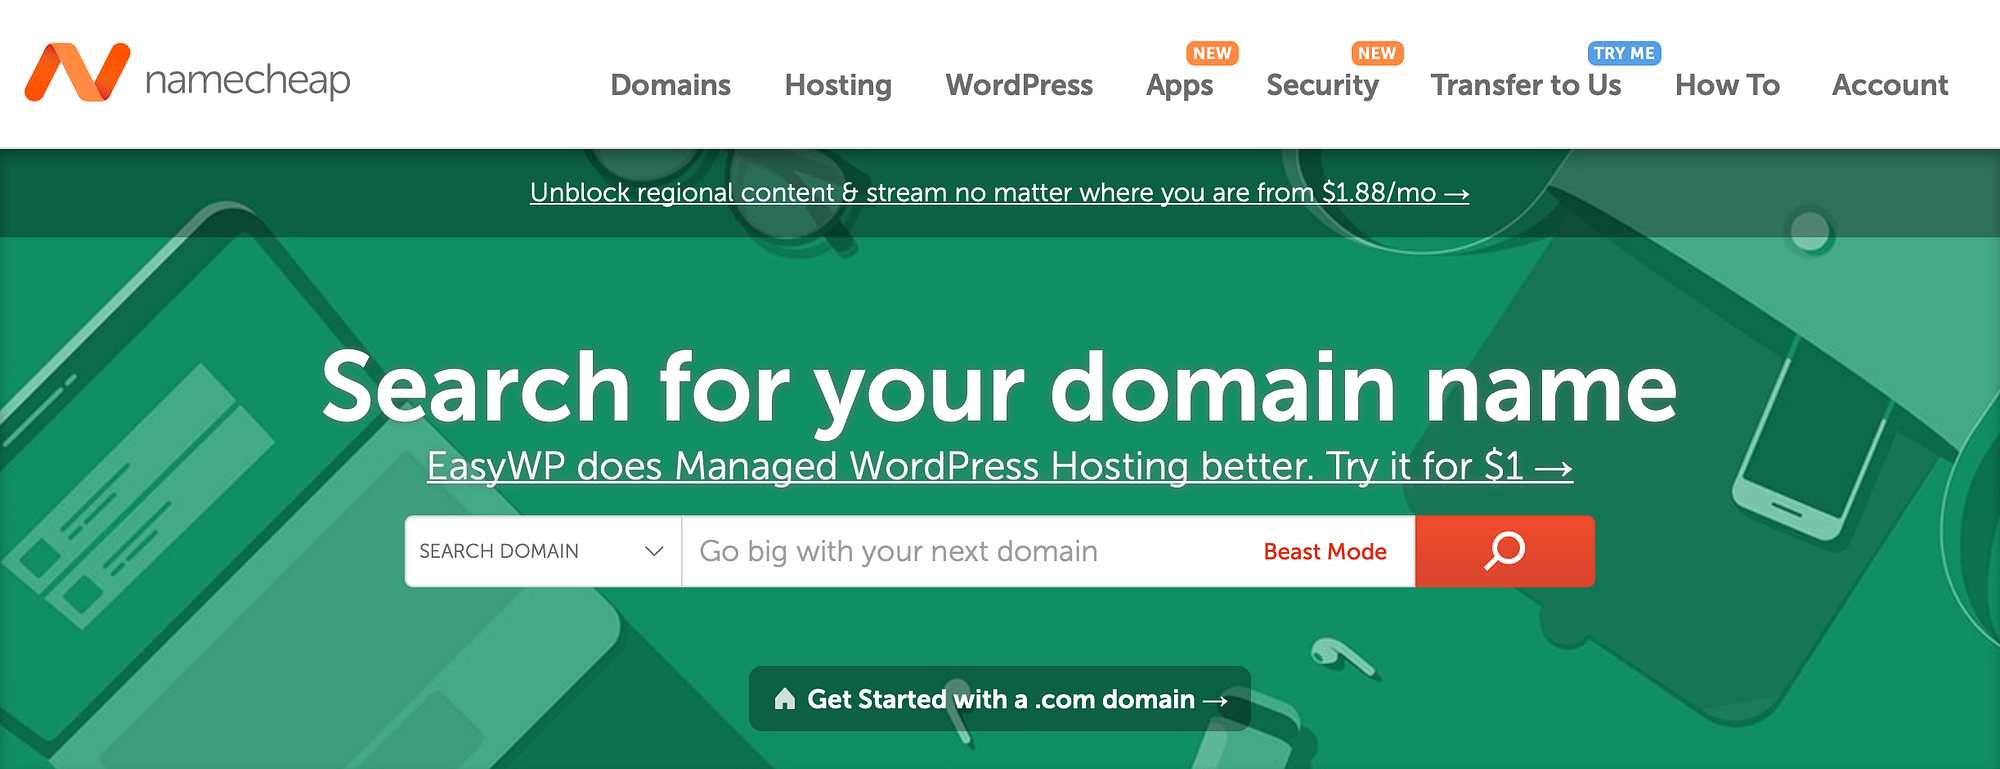 Namecheap is one of the best services to register a domain name